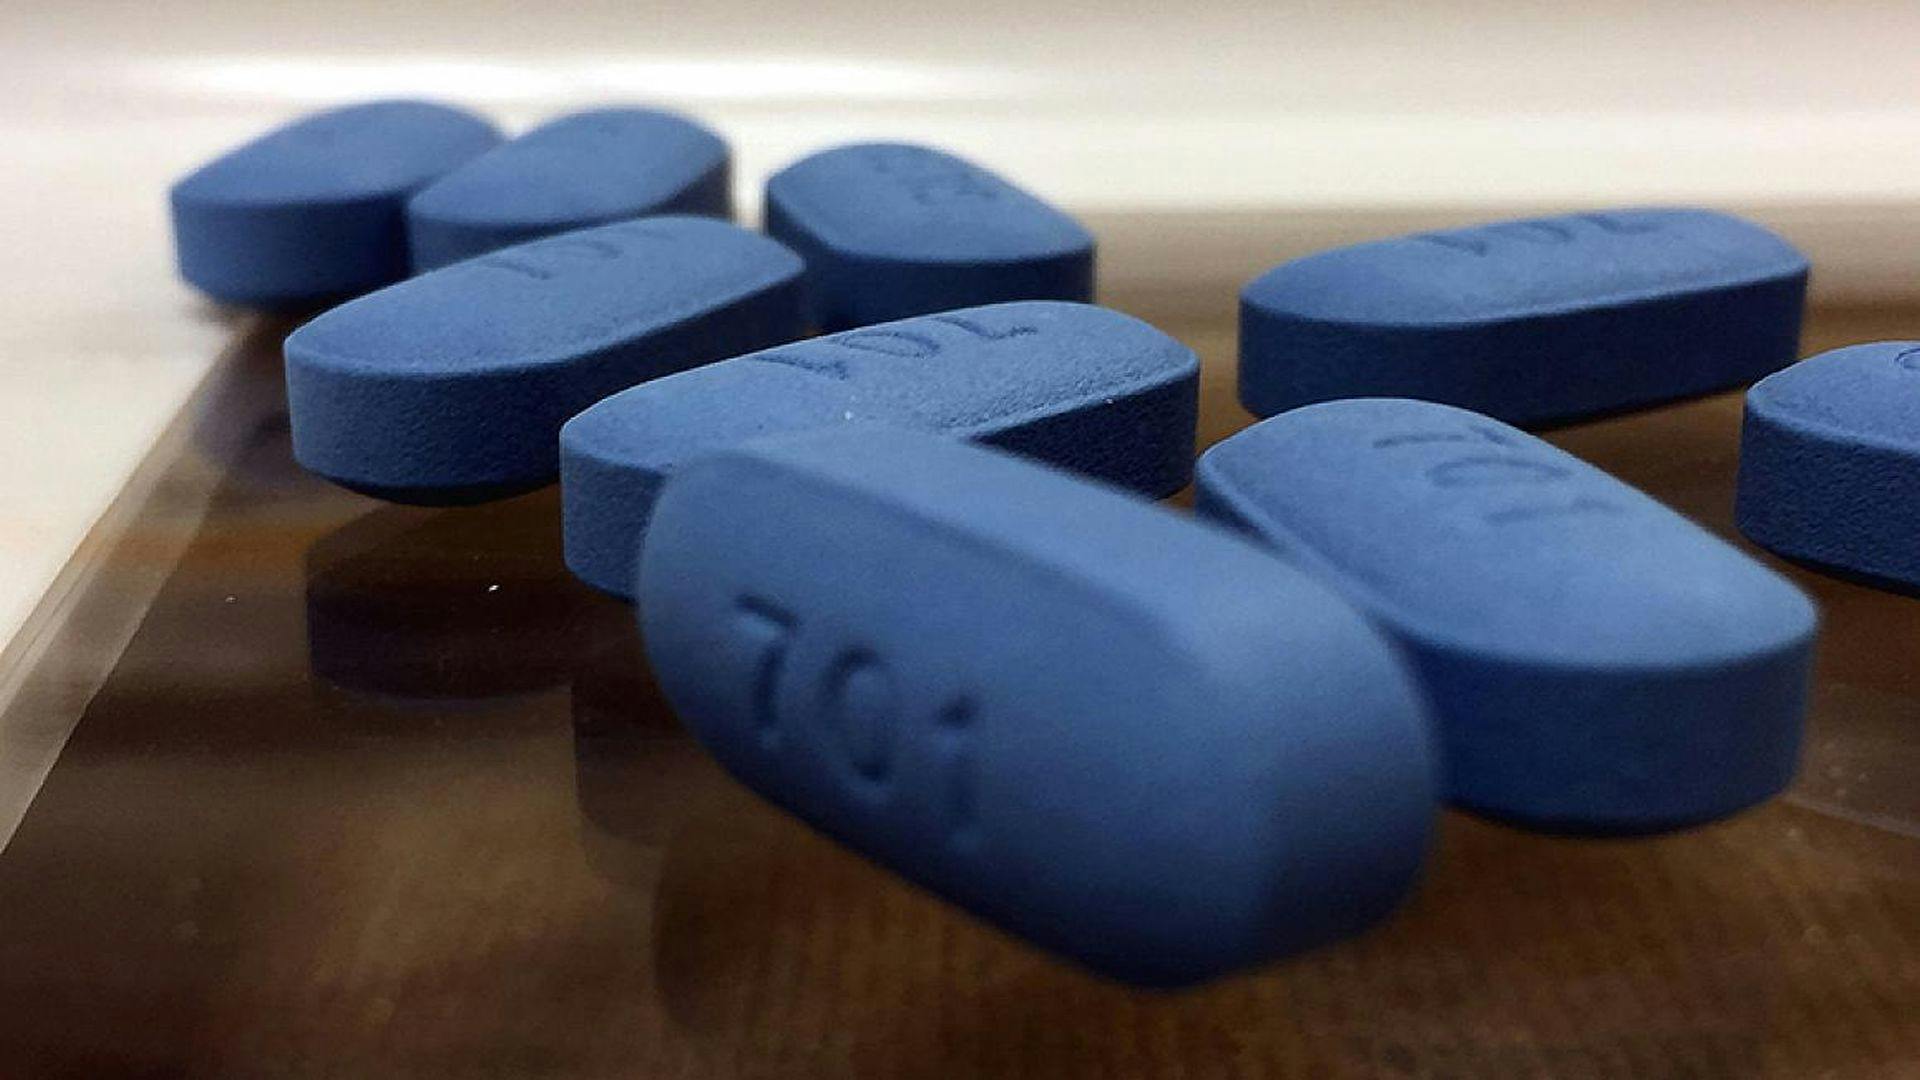 NIH-Funded Study Suggests PrEP Therapy is Safe for Teens